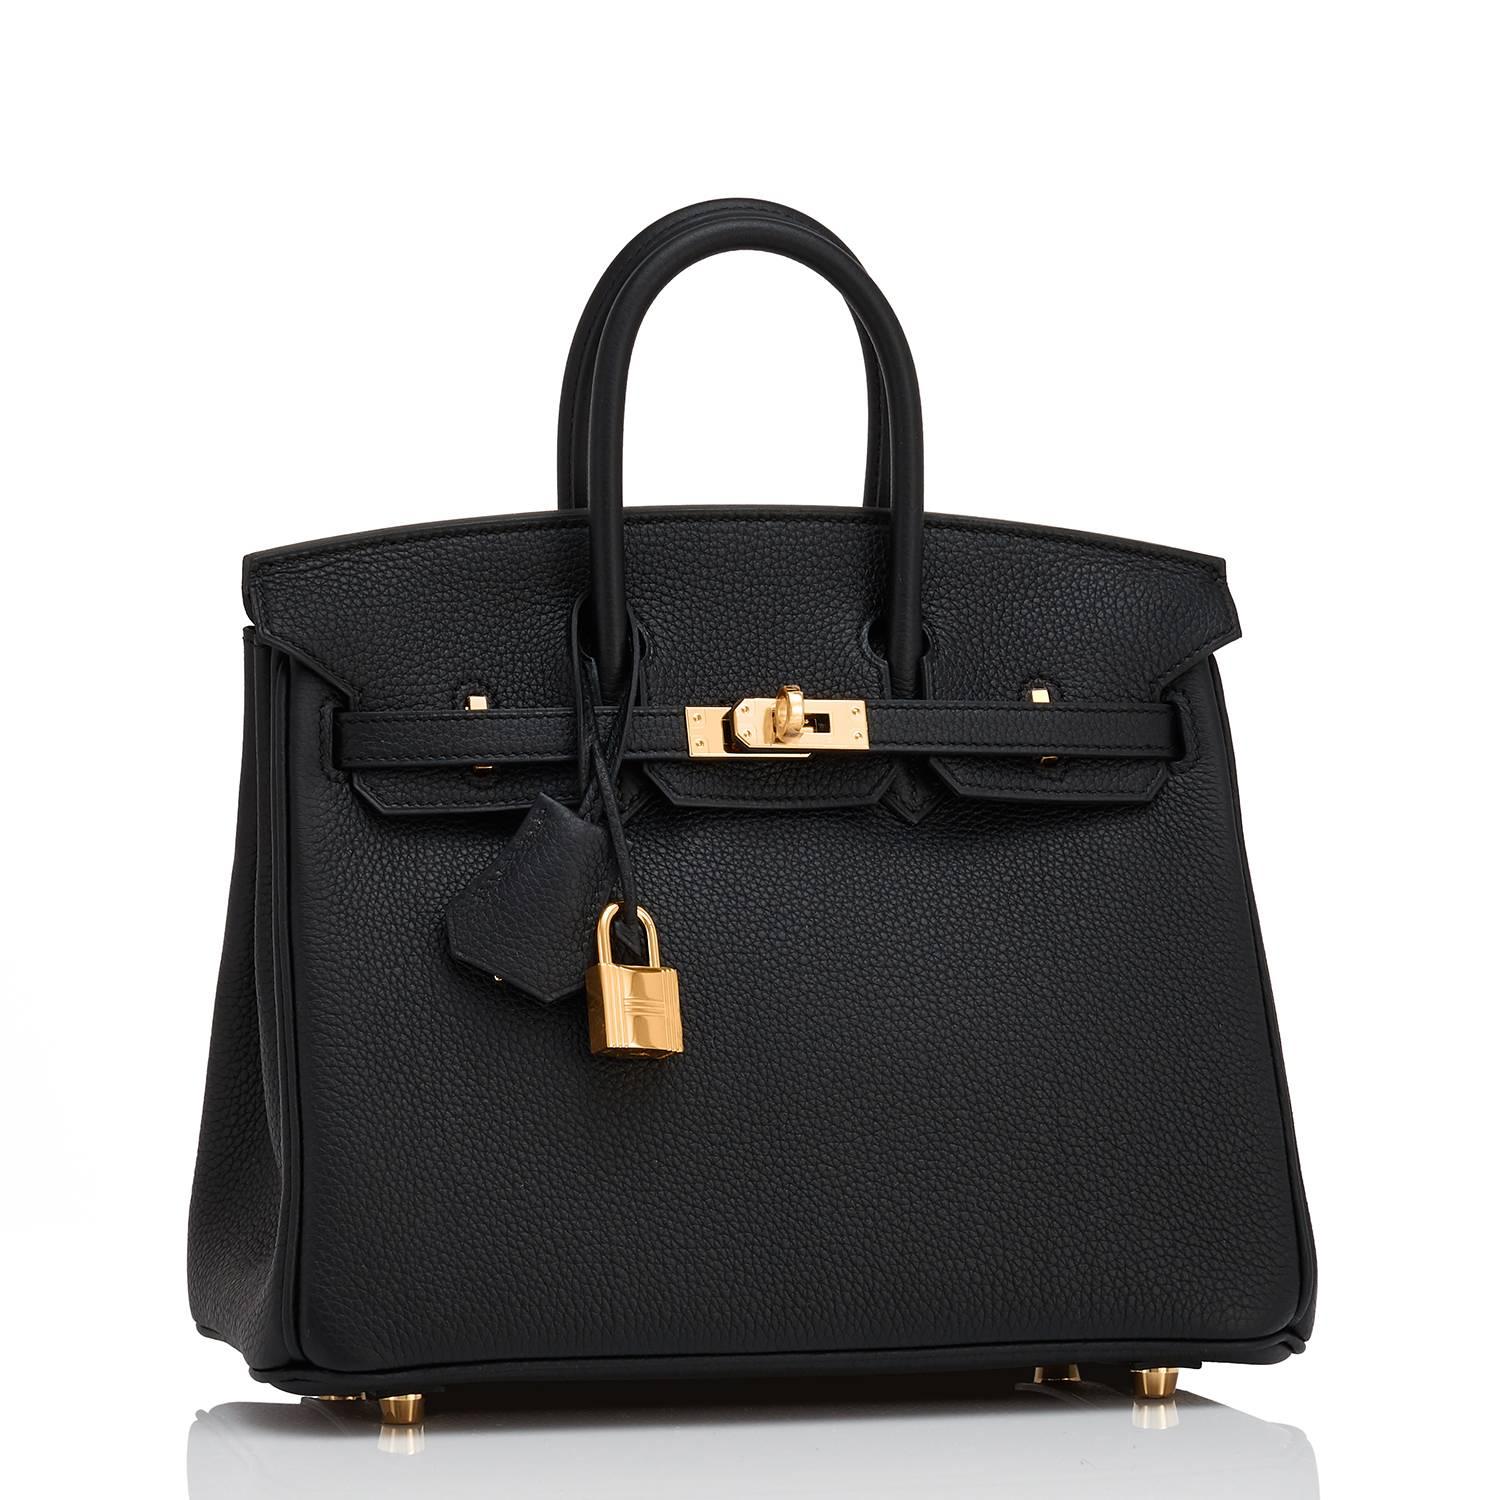 Hermes Black Baby Birkin 25cm Togo Gold Hardware Jewel
Brand New in Box. Store Fresh. Pristine Condition (with plastic on hardware) 
Just purchased from store; bag bears new interior A stamp.
Perfect gift! Comes full set with keys, lock, clochette,